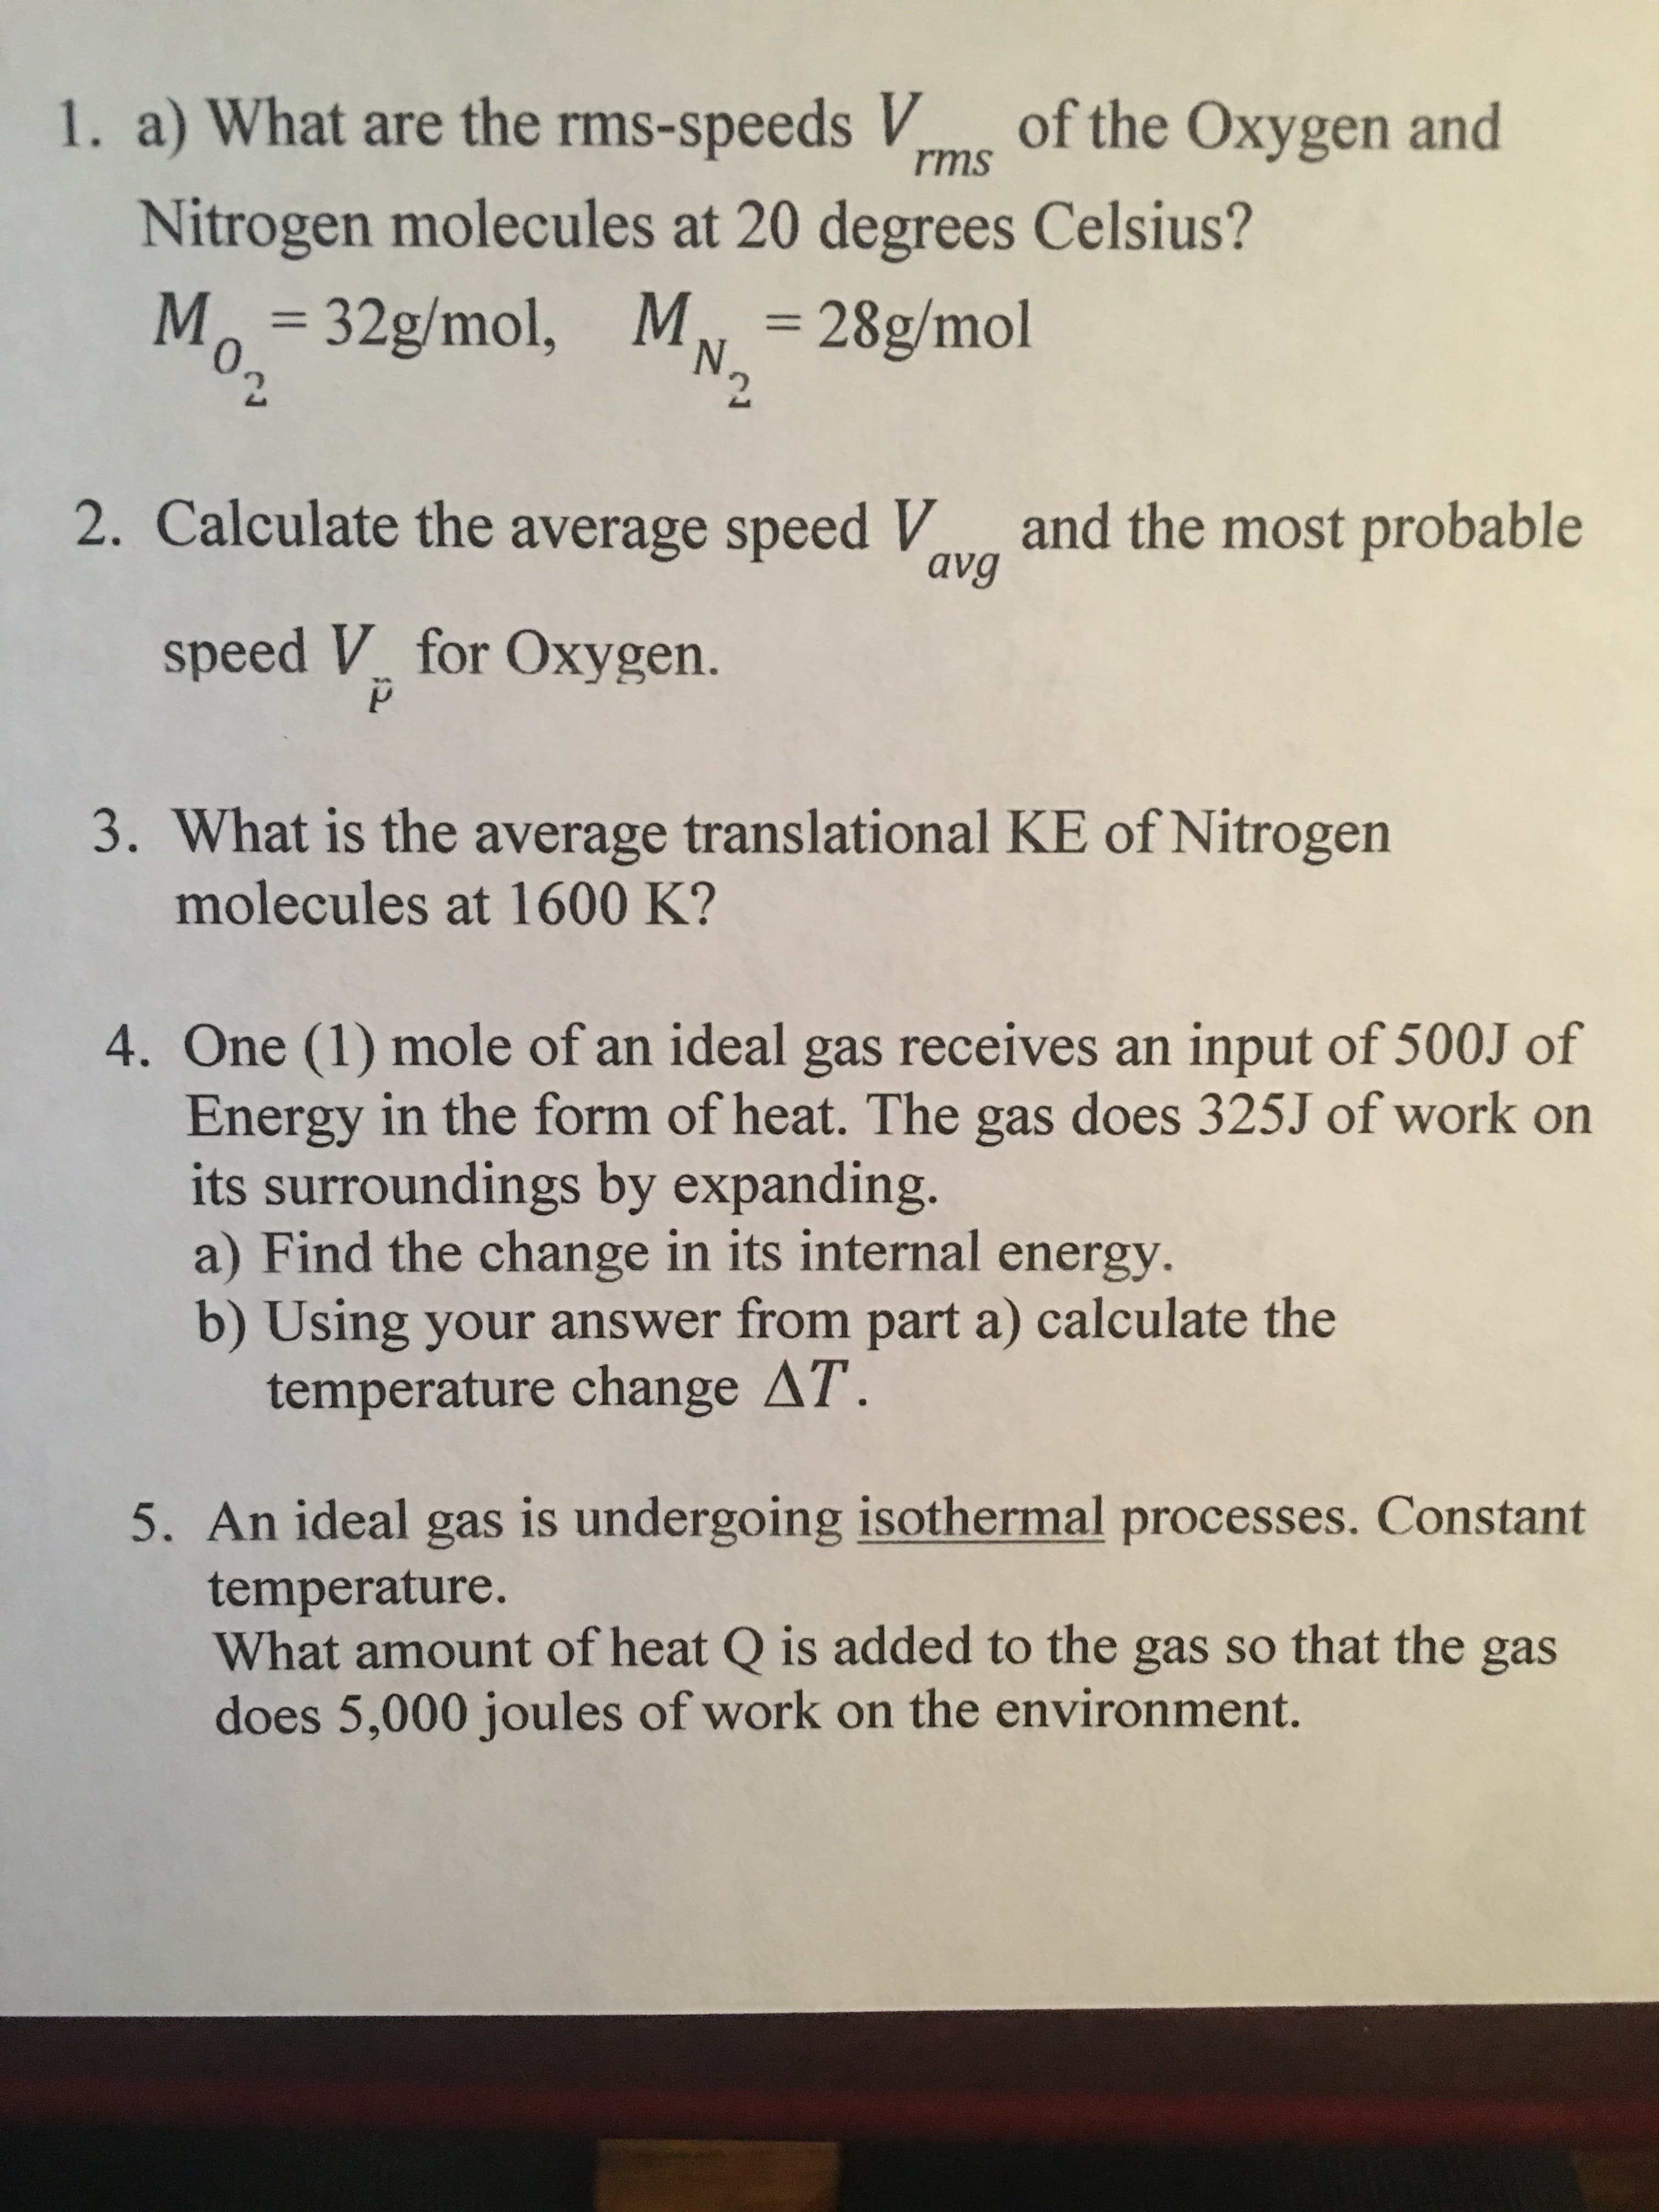 . One (1) mole of an ideal gas receives an input of 500J of
Energy in the form of heat. The gas does 325J of work on
its surroundings by expanding.
a) Find the change in its internal energy.
b) Using your answer from part a) calculate the
temperature change AT.
